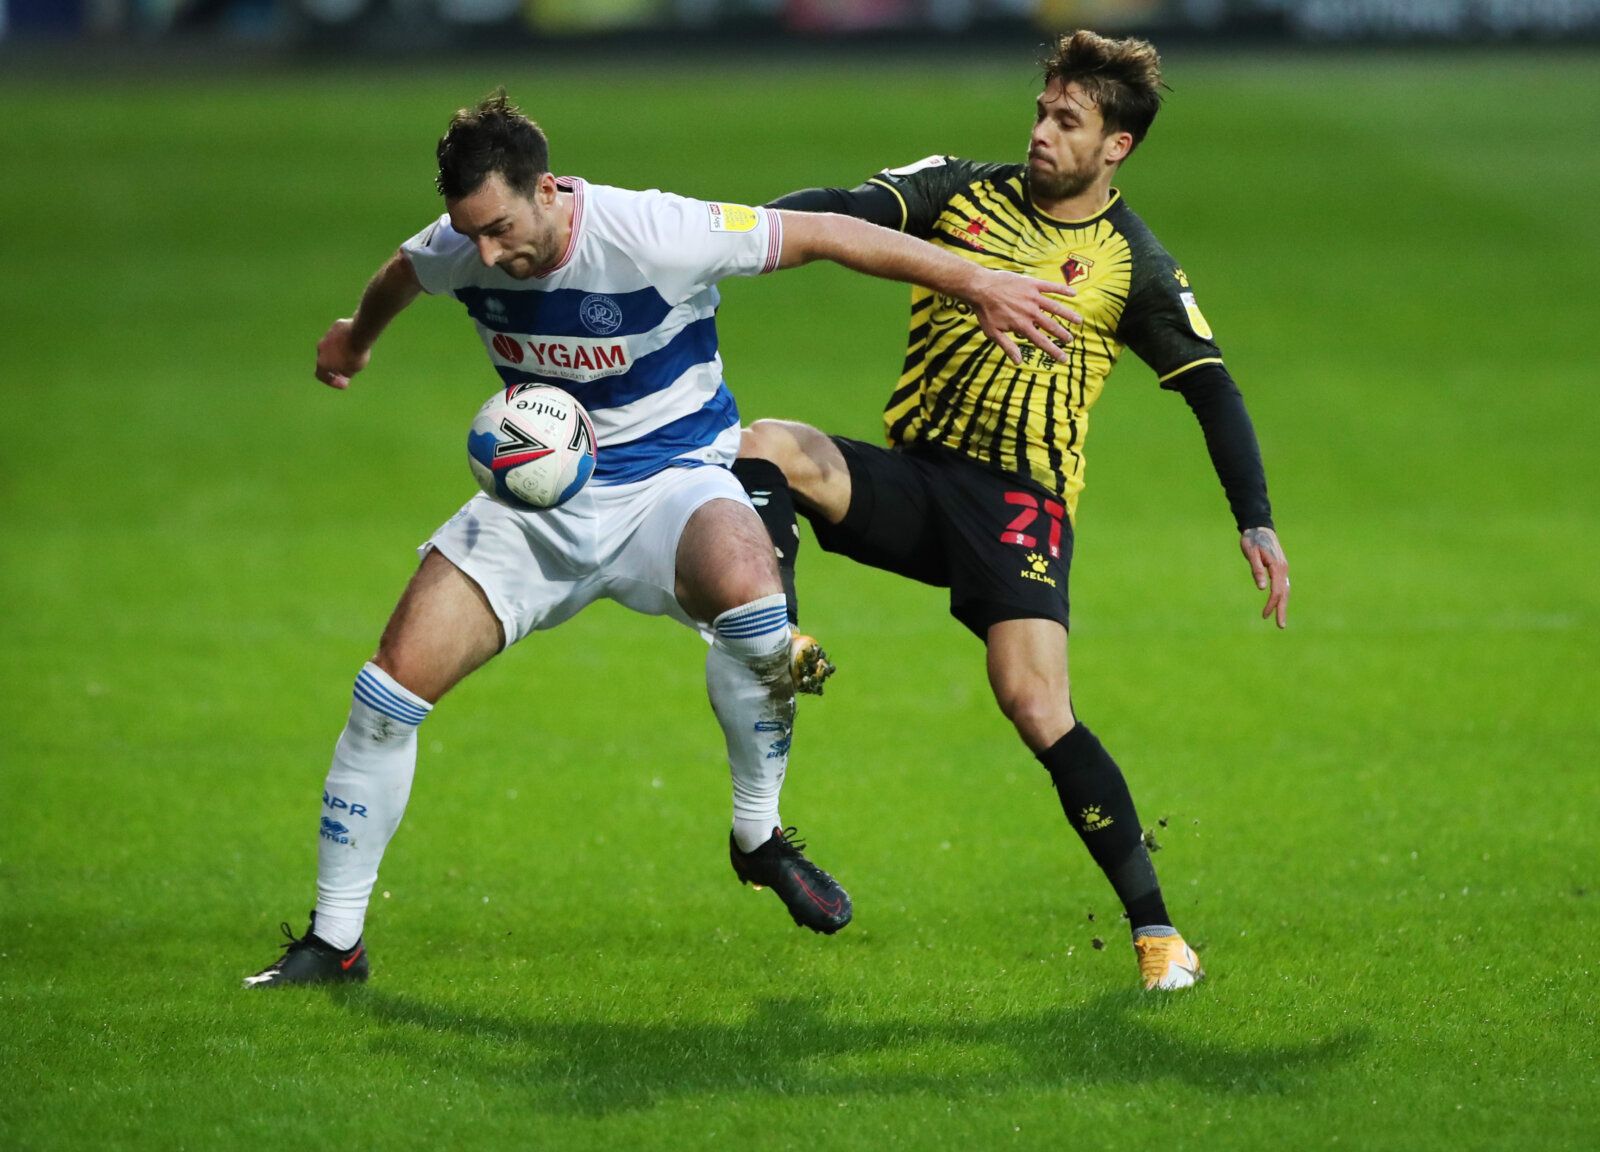 Soccer Football - Championship - Queens Park Rangers v Watford - Loftus Road, London, Britain - November 21, 2020 QPR's Lee Wallace in action with Watford's Kiko Action Images/Peter Cziborra EDITORIAL USE ONLY. No use with unauthorized audio, video, data, fixture lists, club/league logos or 'live' services. Online in-match use limited to 75 images, no video emulation. No use in betting, games or single club /league/player publications.  Please contact your account representative for further deta